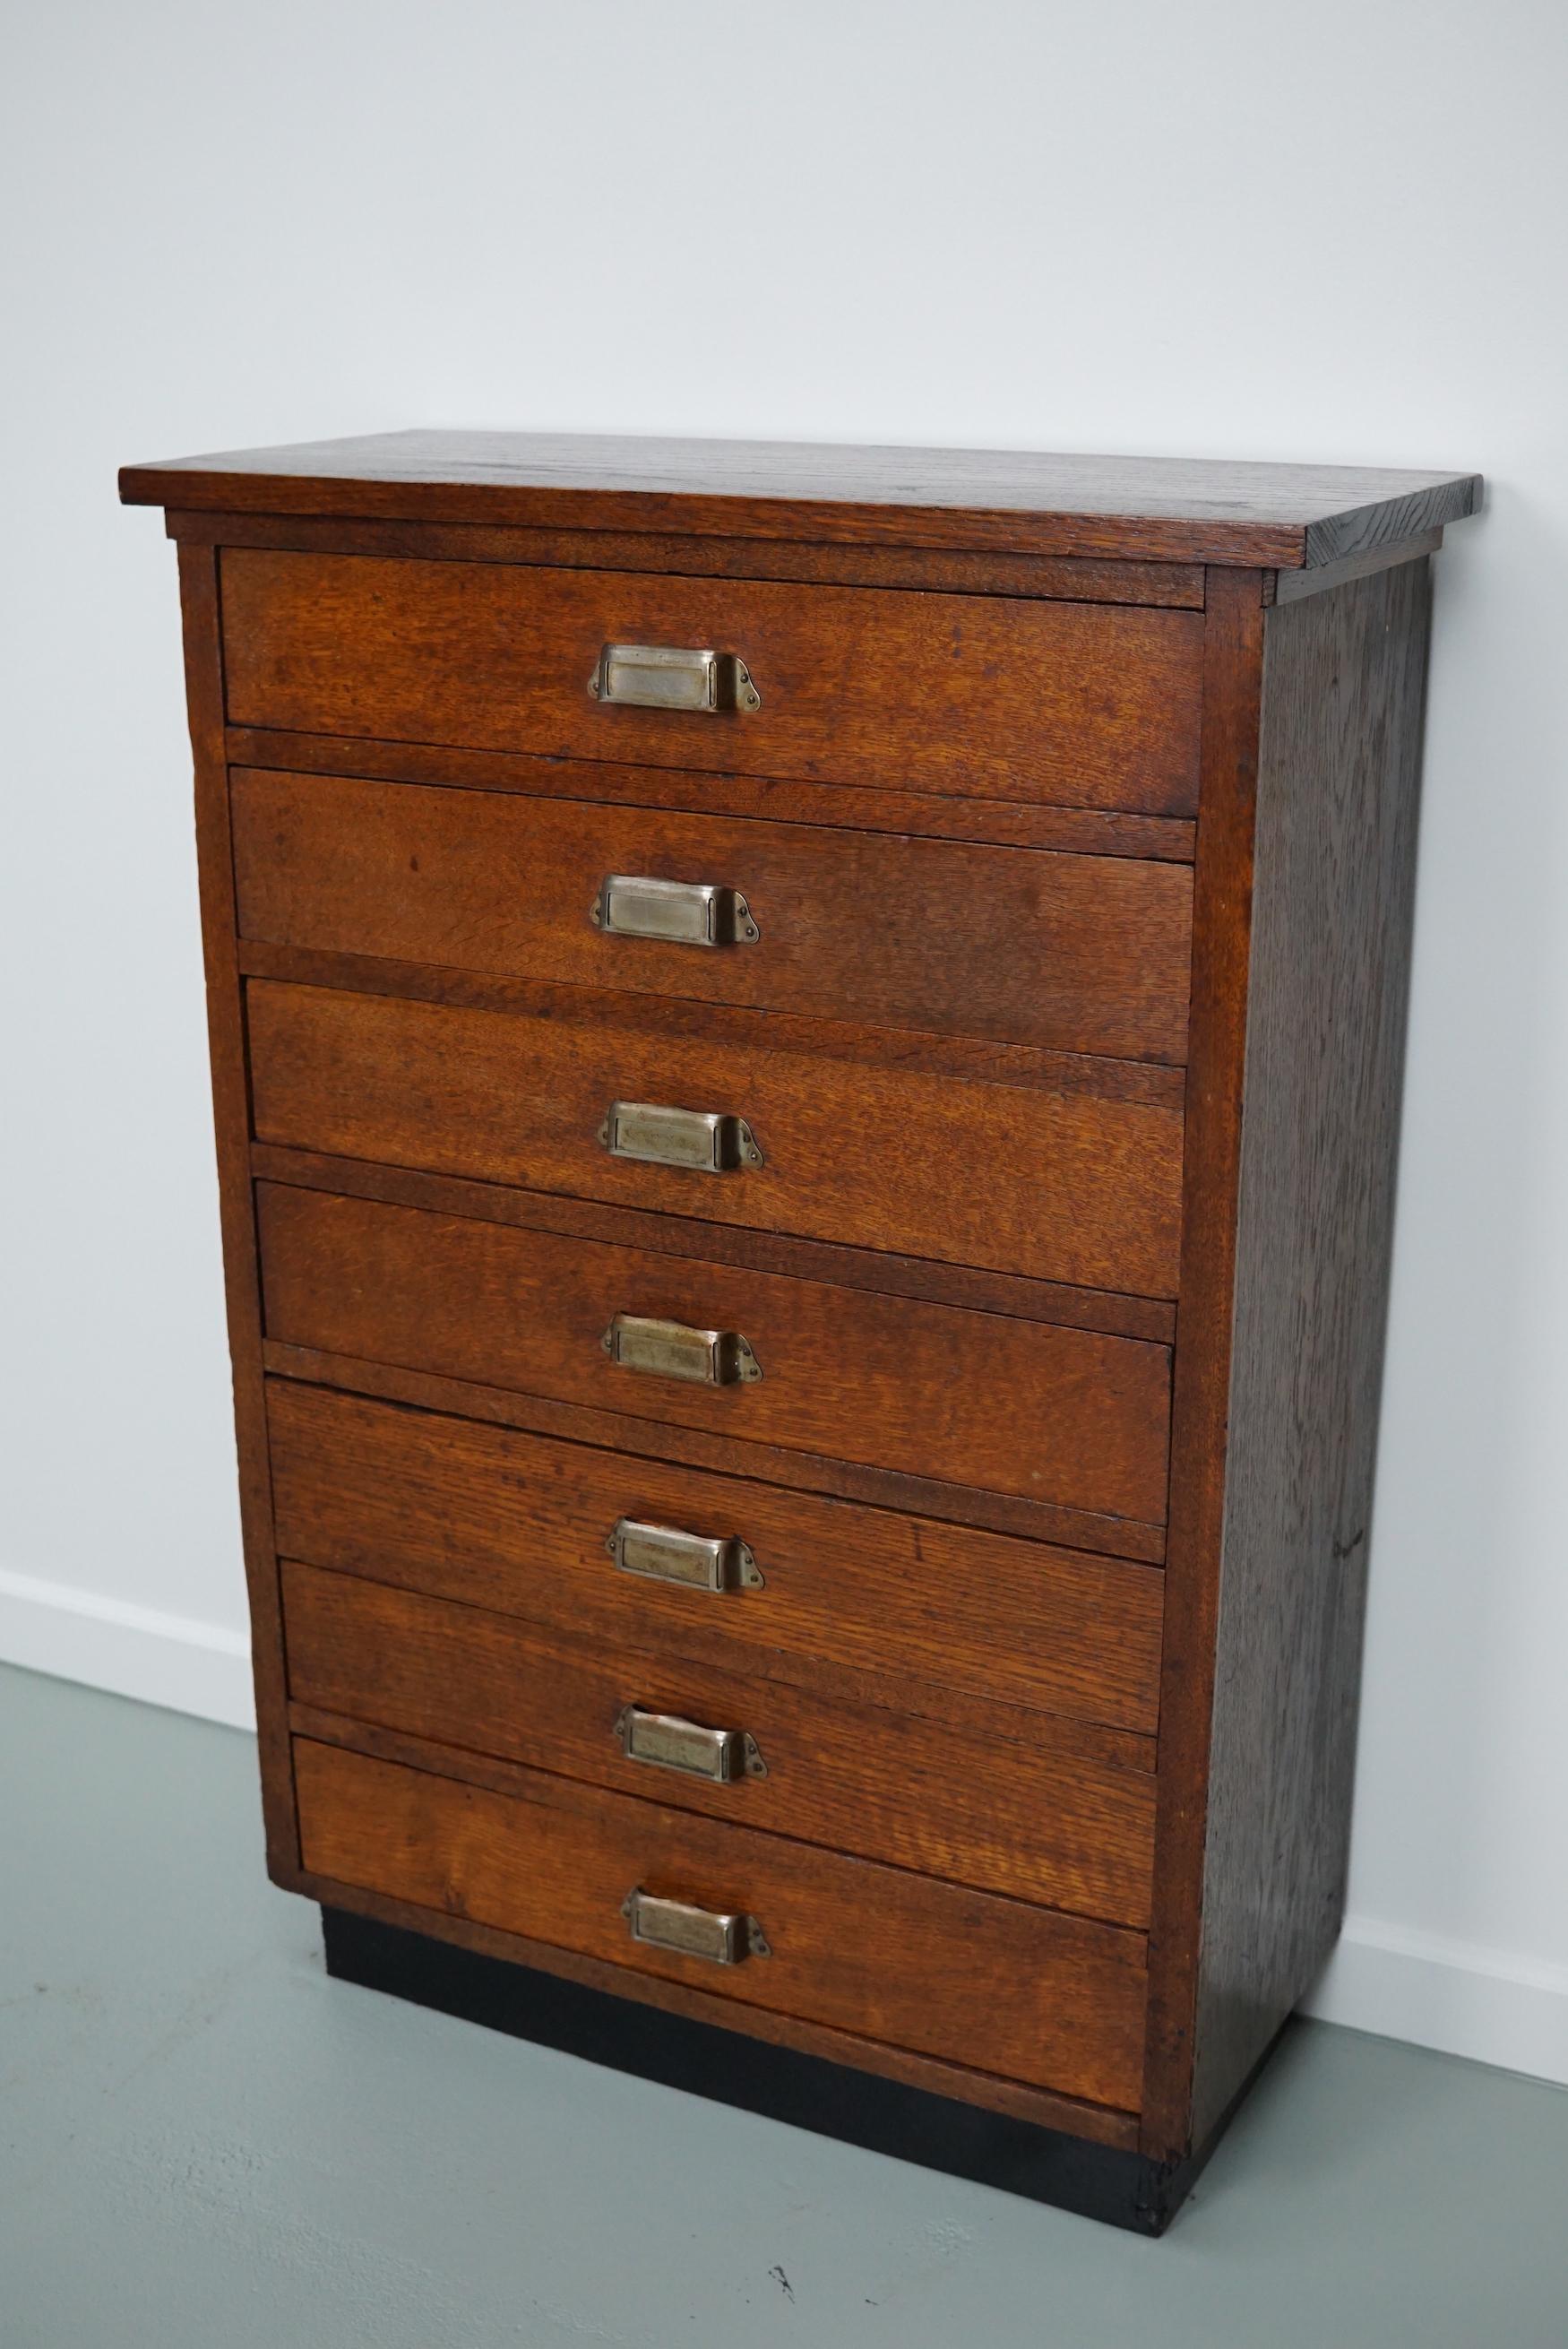 This apothecary cabinet was designed and made from oak circa 1930 in the Netherlands. It features 7 drawers with brass hardware. The inside of the drawers measure: DWH 18 x 52 x 8 cm.